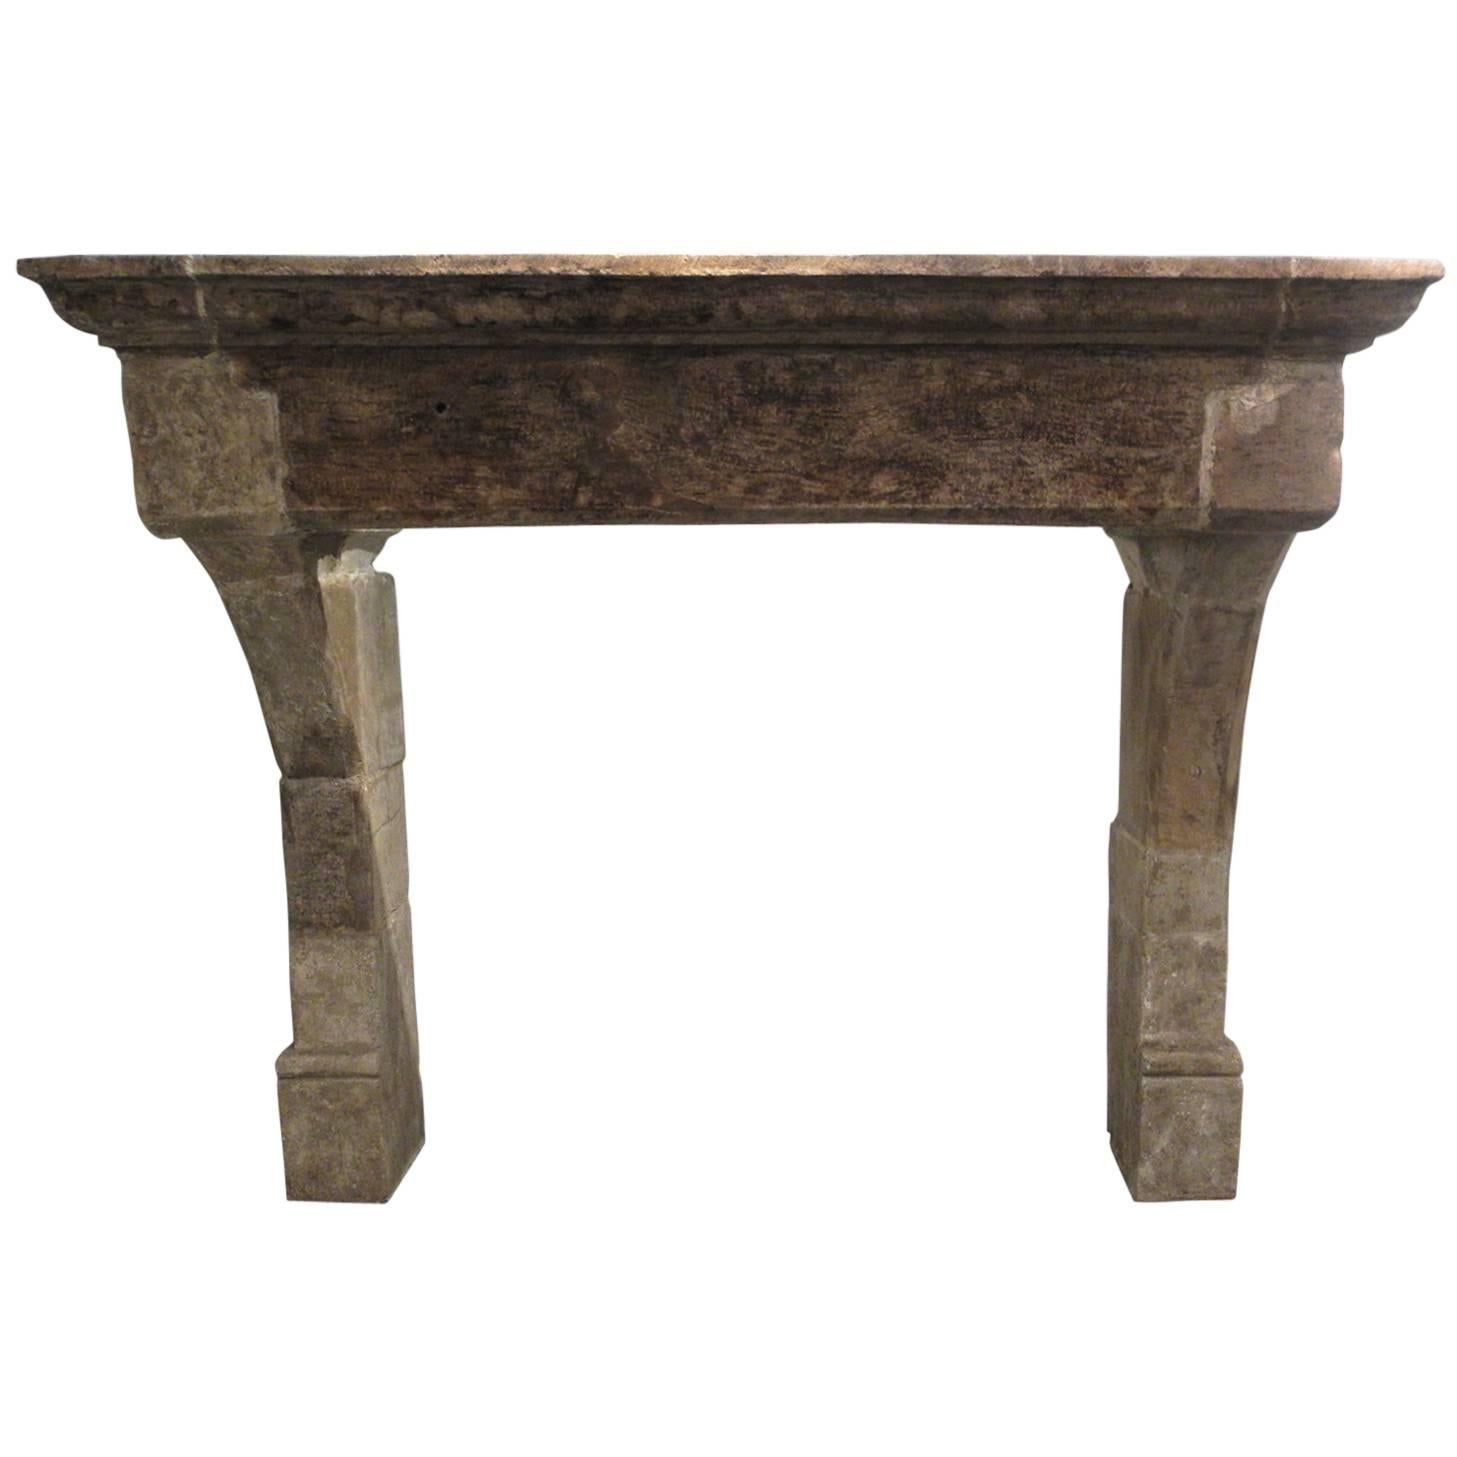 Antique Fireplace Mantel from Ainsi For Sale